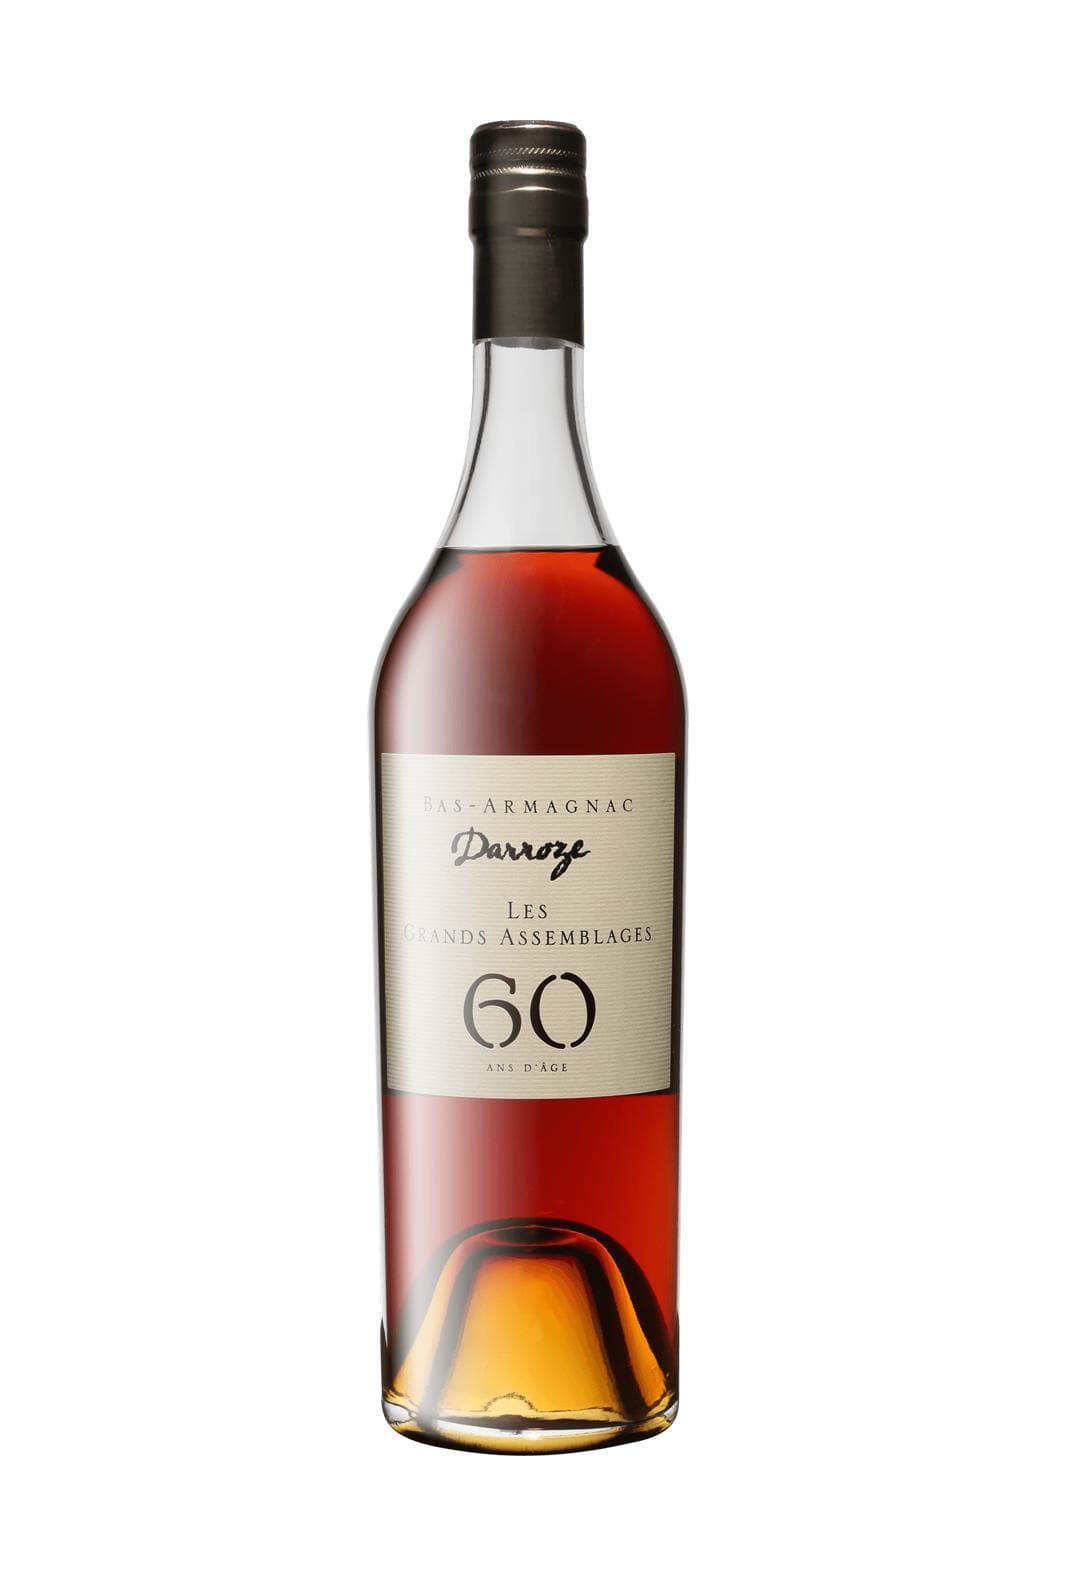 Darroze Bas Armagnac Les Grands Assemblages 60 years 42% 700ml | Brandy | Shop online at Spirits of France